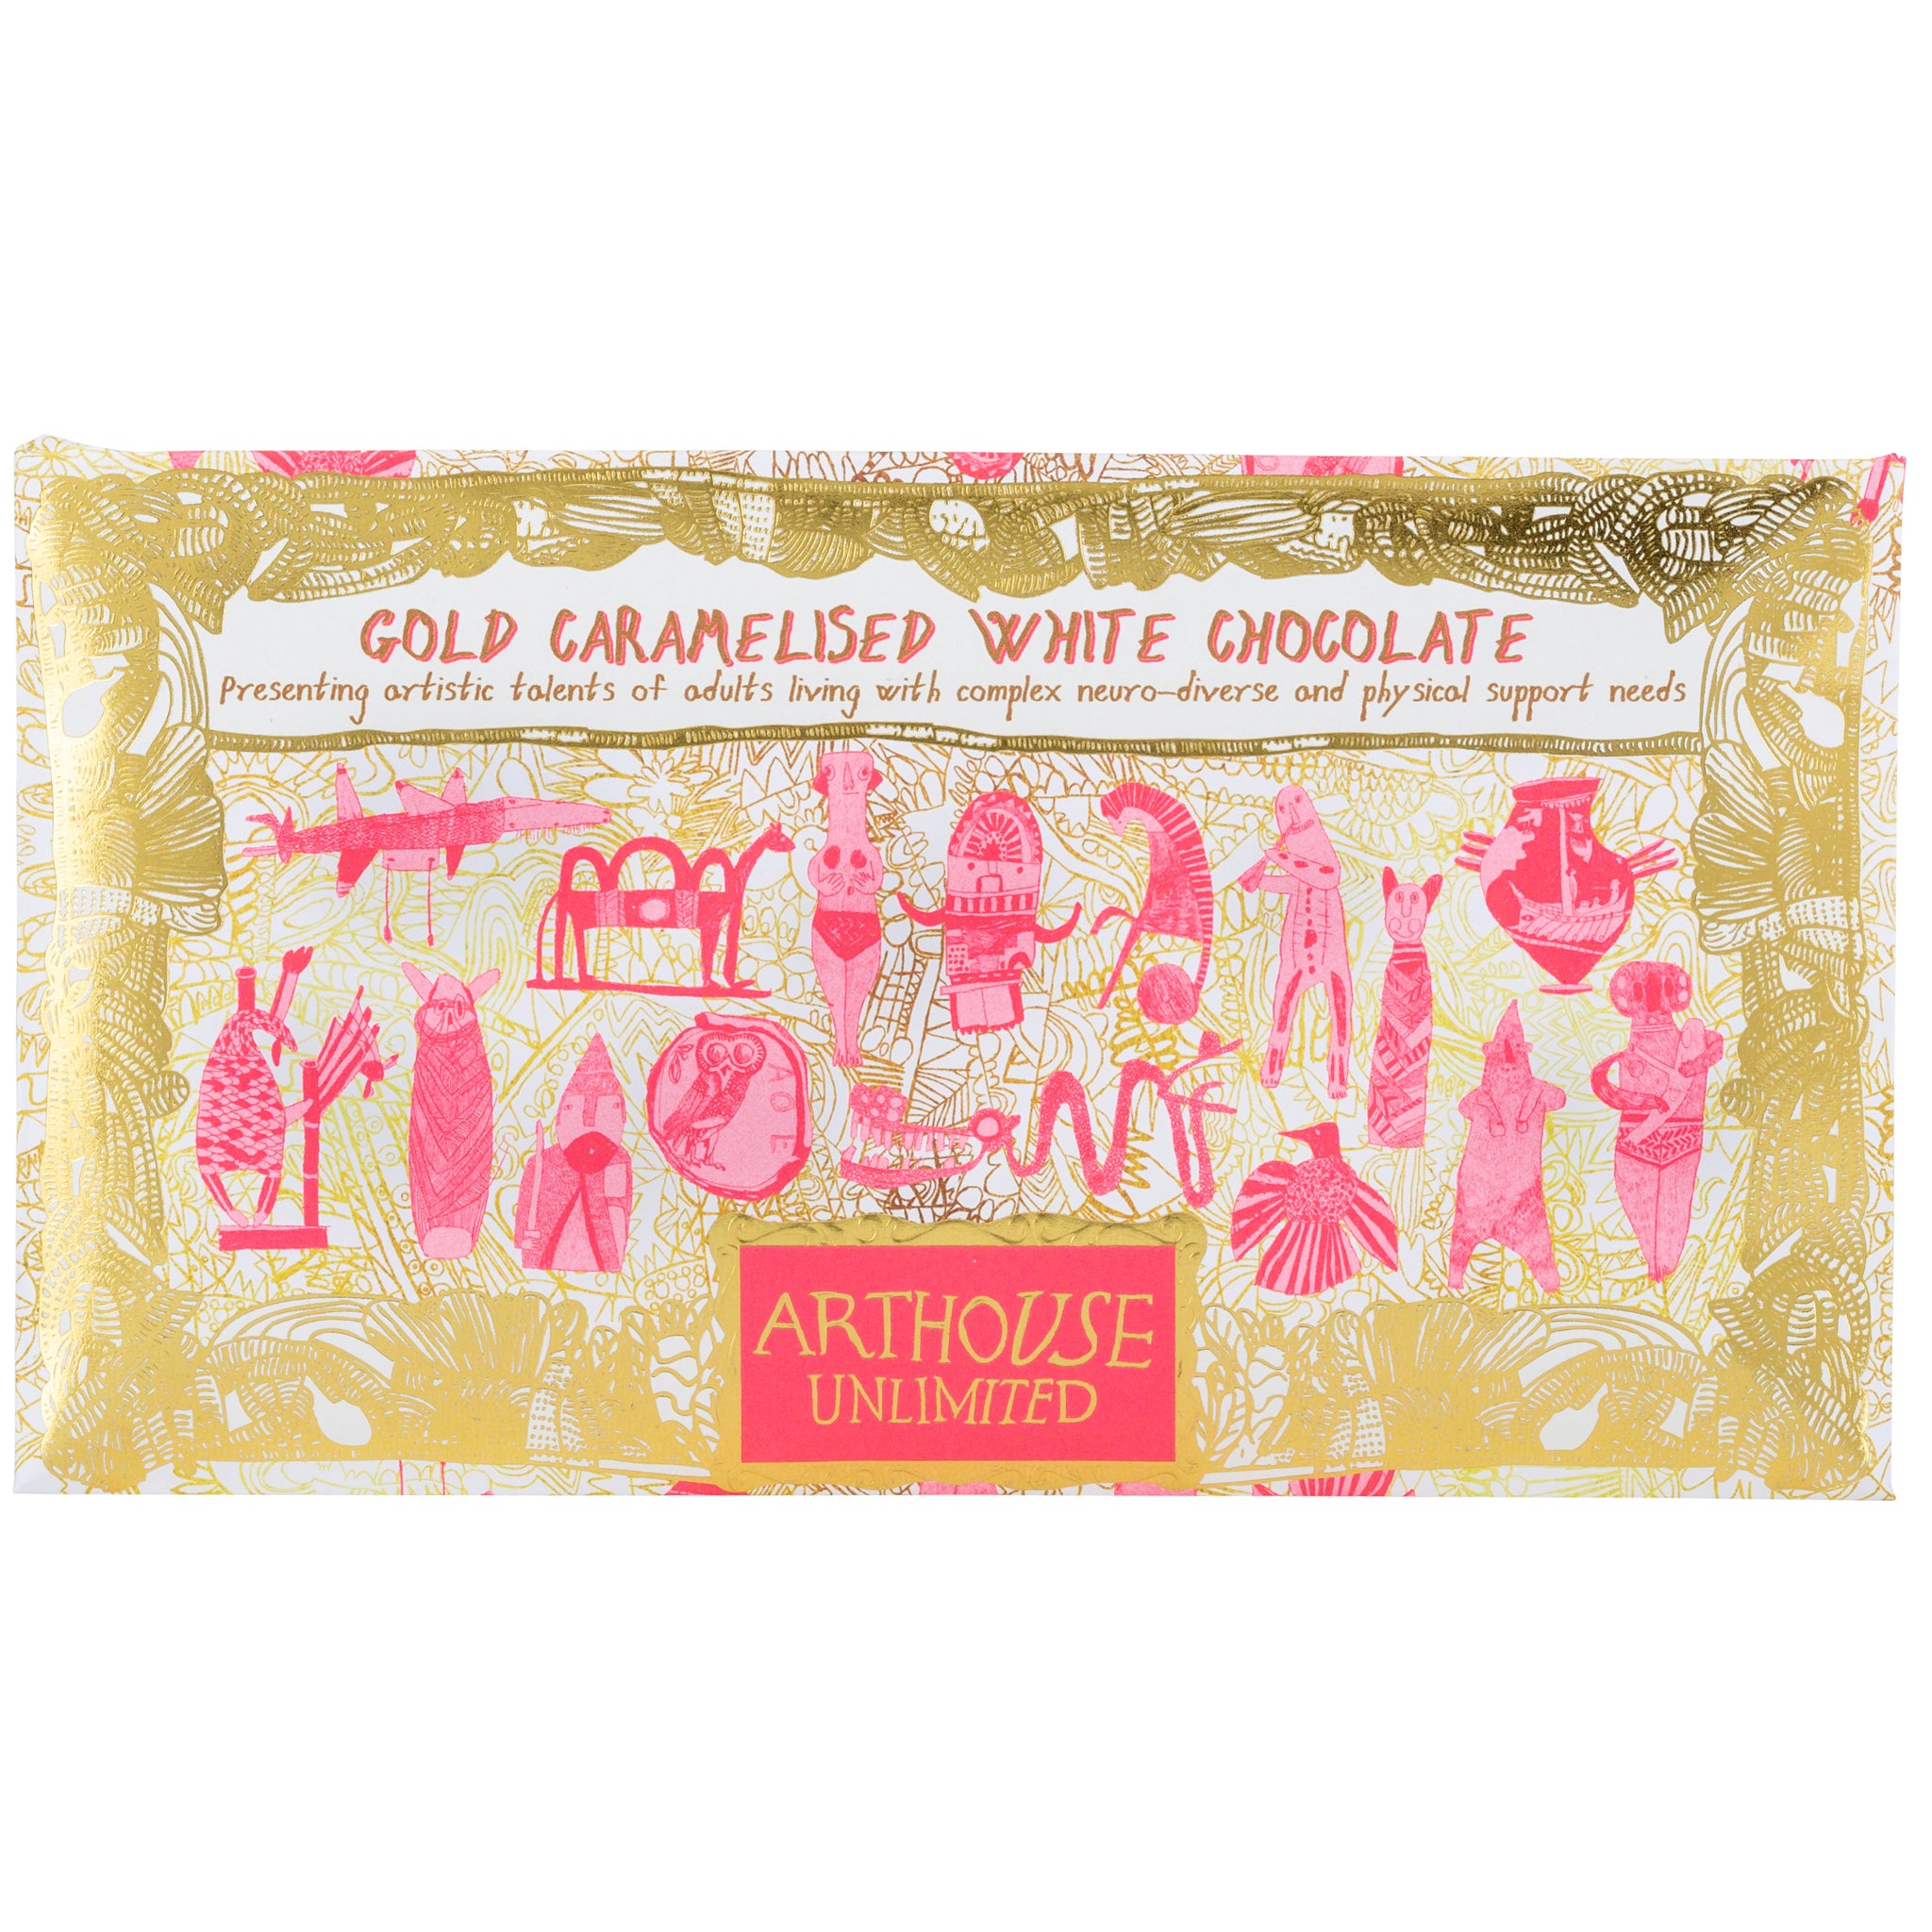 Pink and gold Timeless Treasures, Gold Caramelised White Chocolate Bar